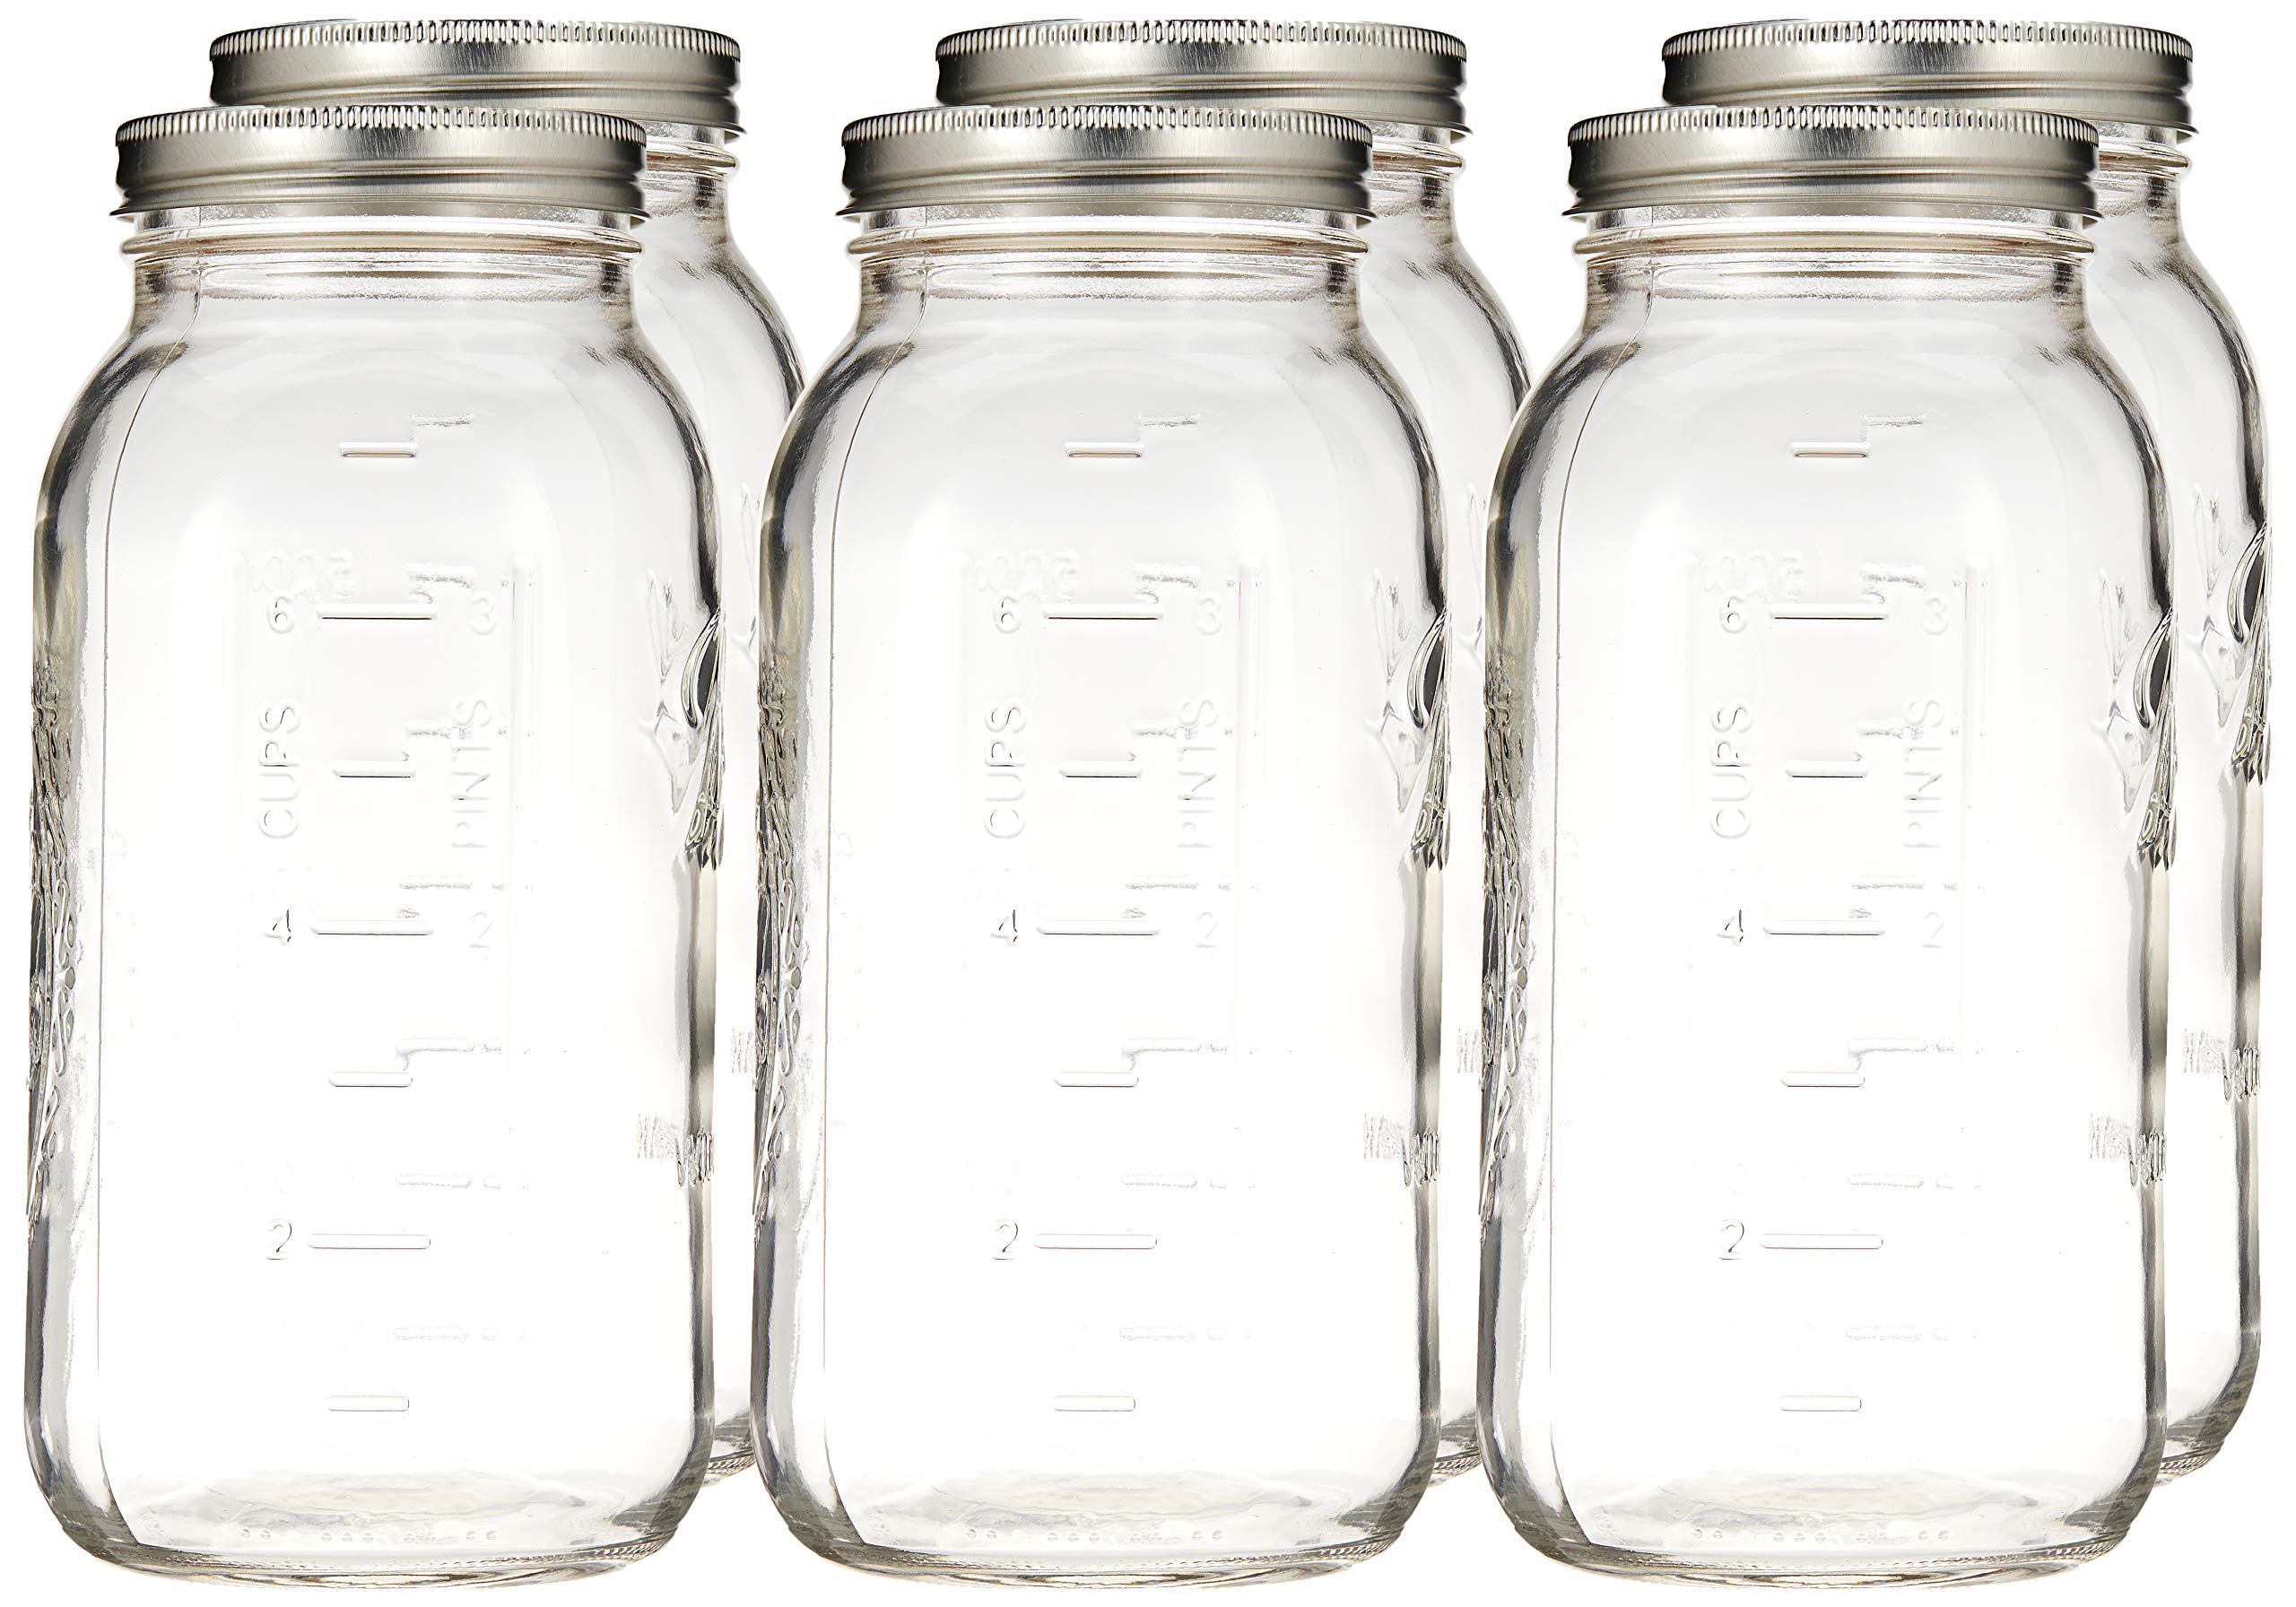 Ball Wide Mouth Half Gallon 64 Oz Jars with Lids and Bands, Set of 6